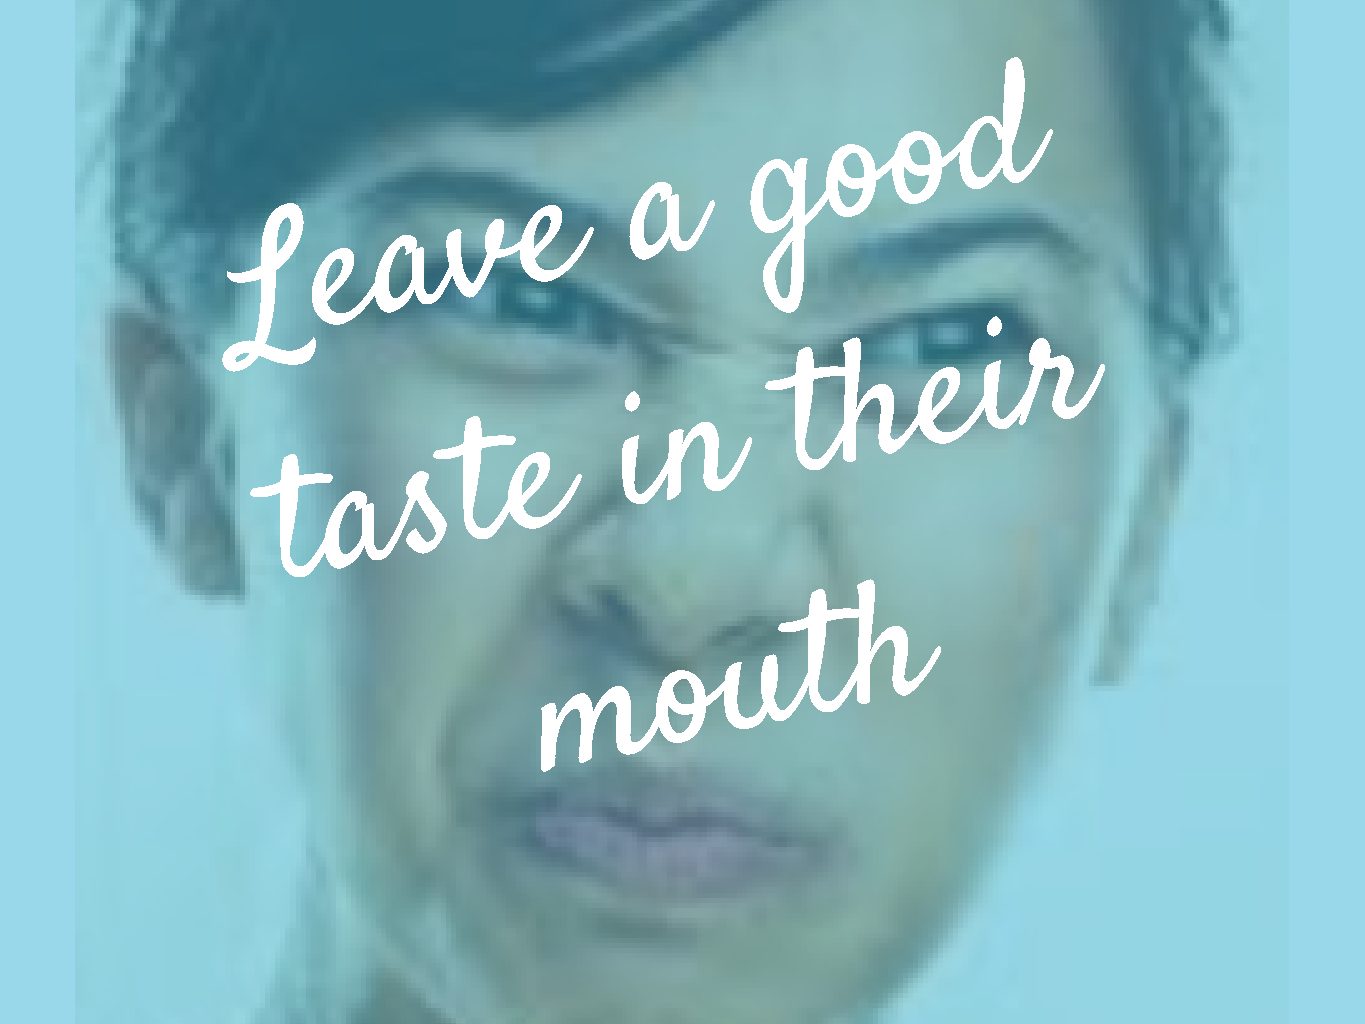 Leave a good taste in their mouth